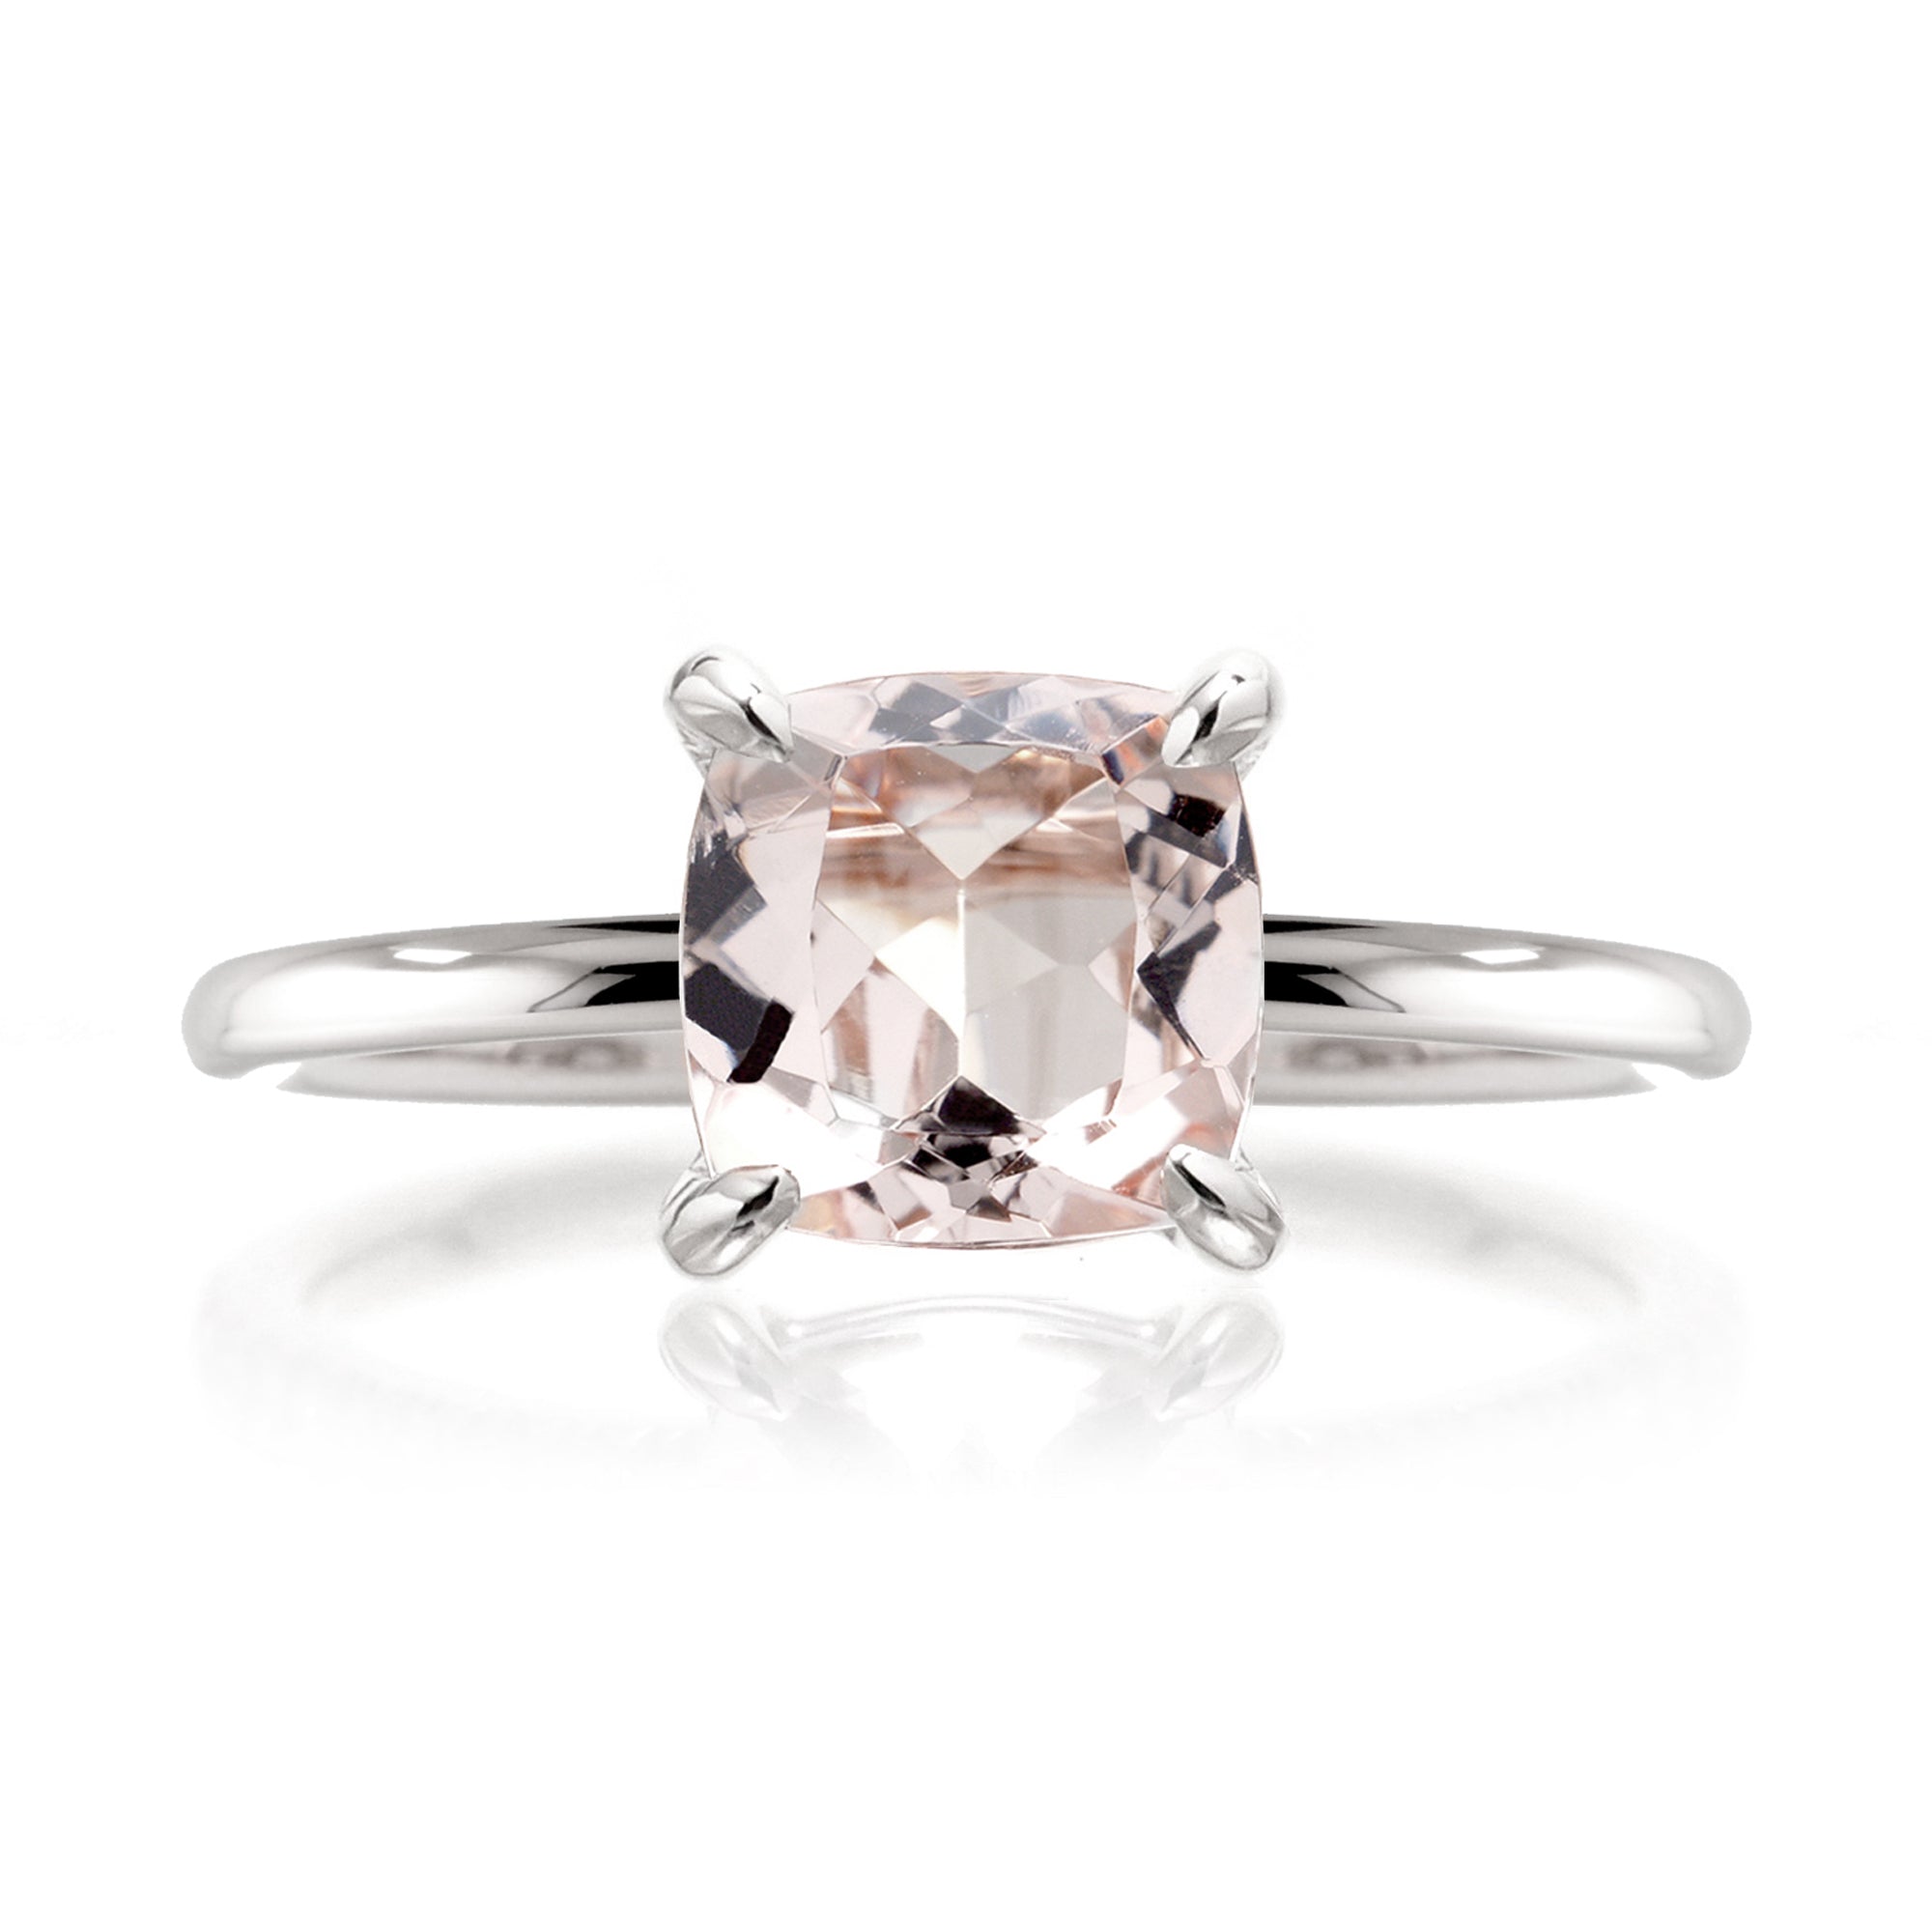 Square cushion morganite solid band ring in white gold - The Ava